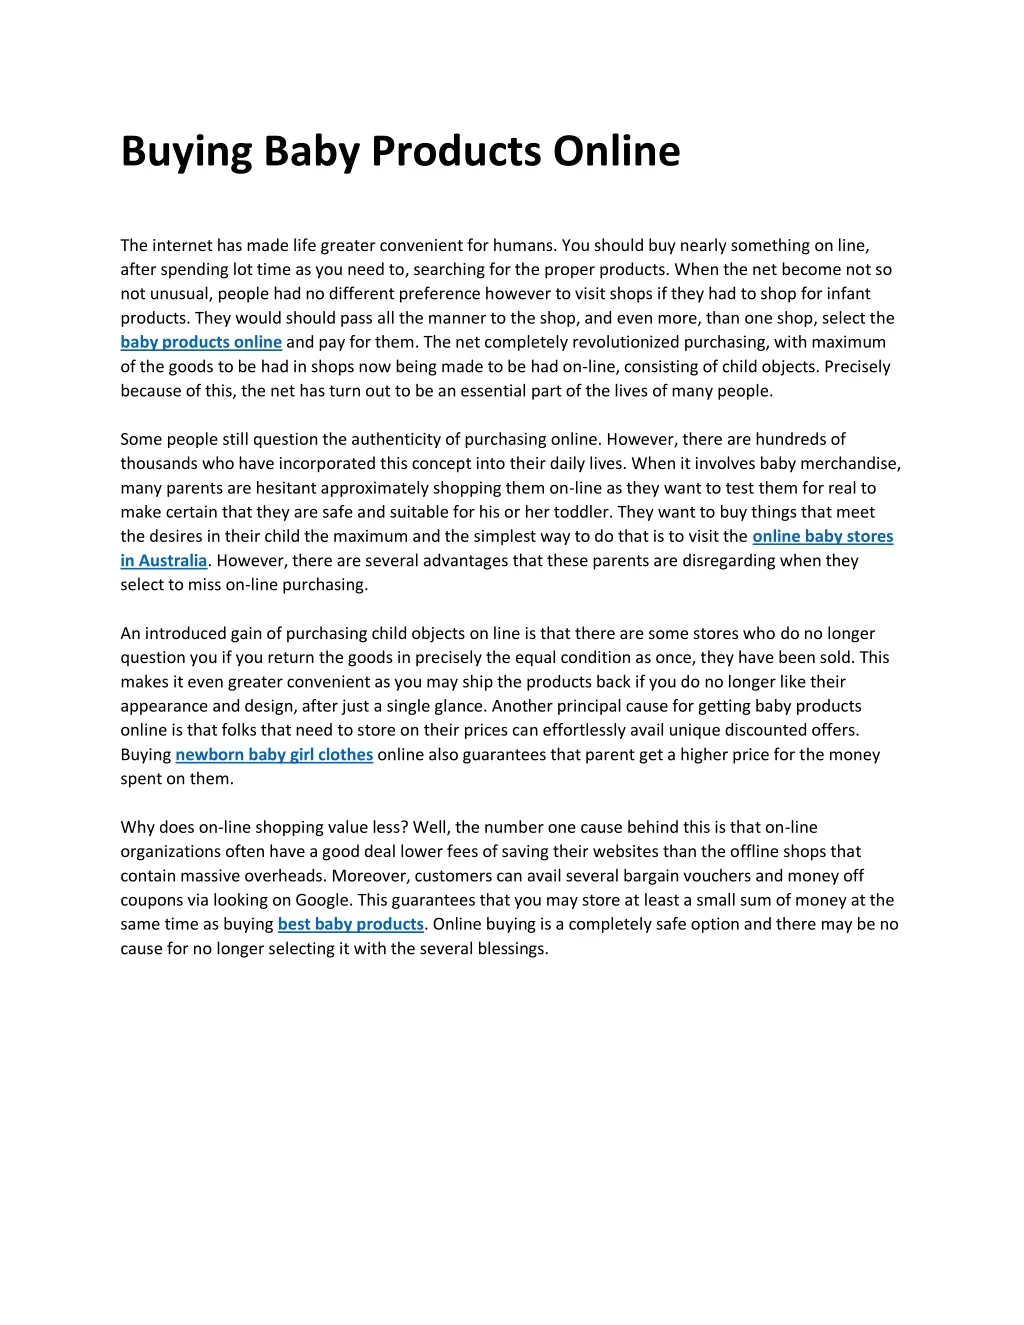 buying baby products online